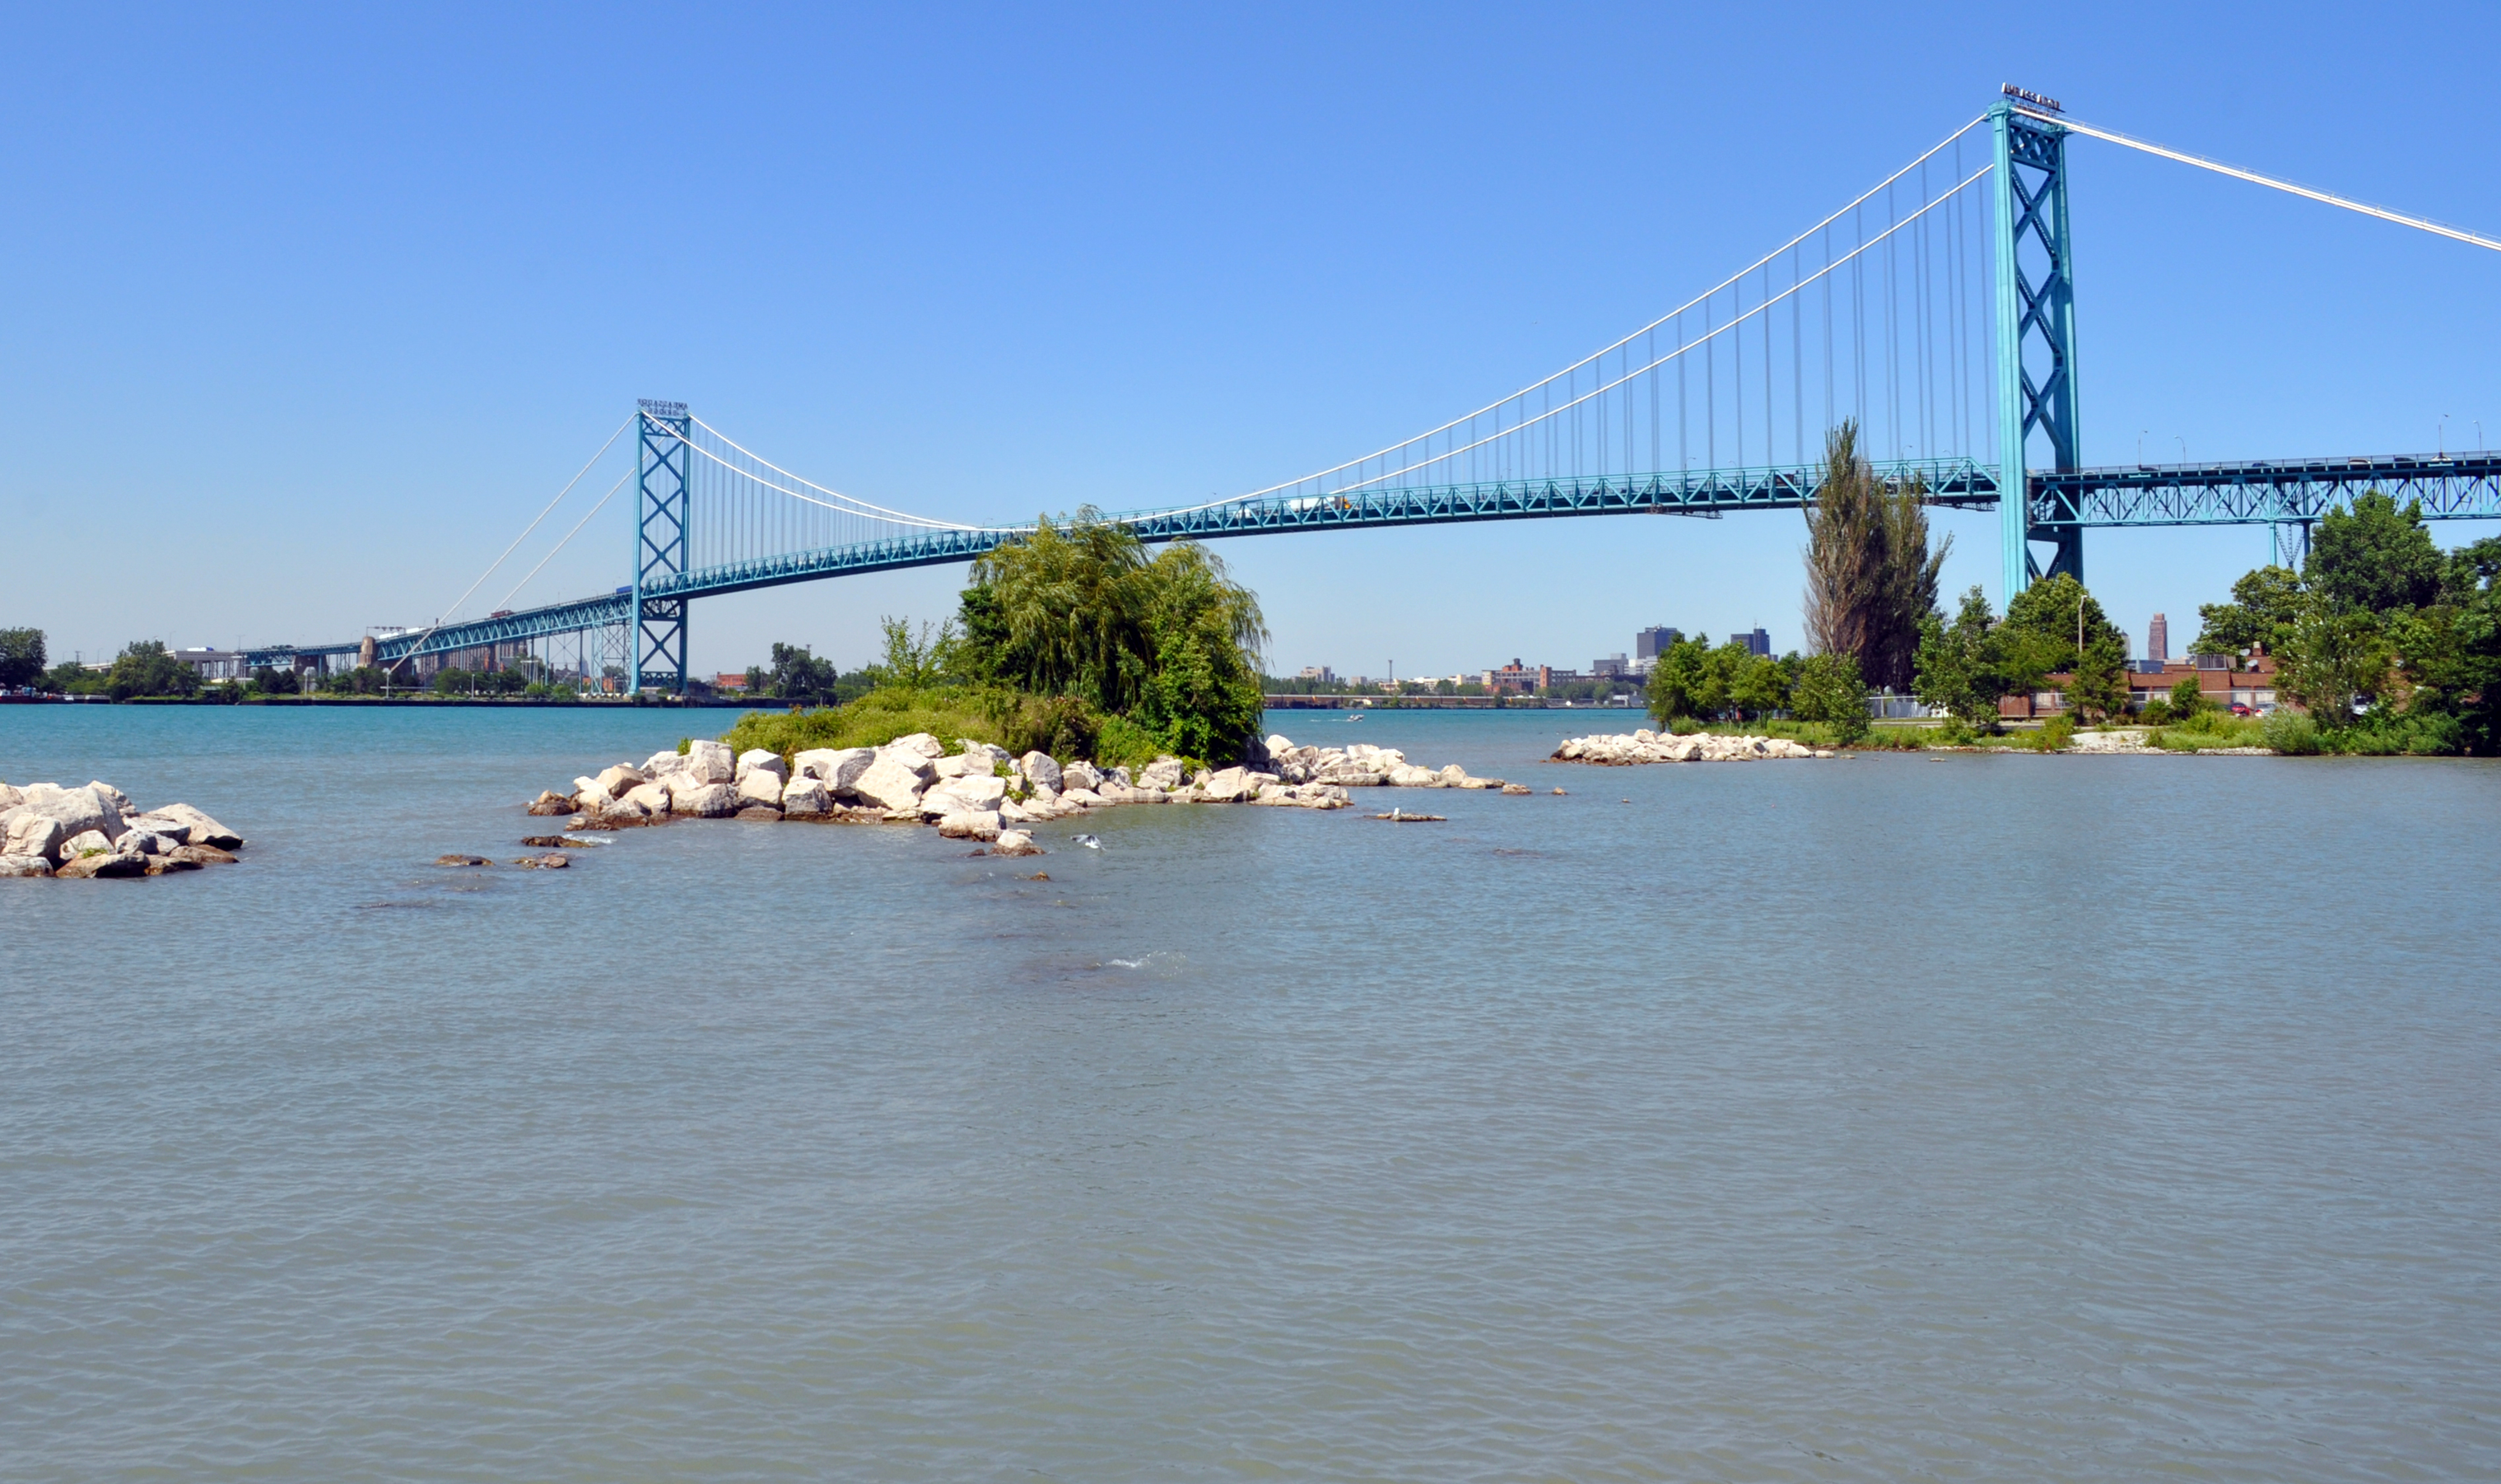 The Detroit River is the busiest international crossing point in North America. The Ambassador Bridge is one of the sturgeon spawning reef habitat projects. Photo: Essex Region Conservation Authority